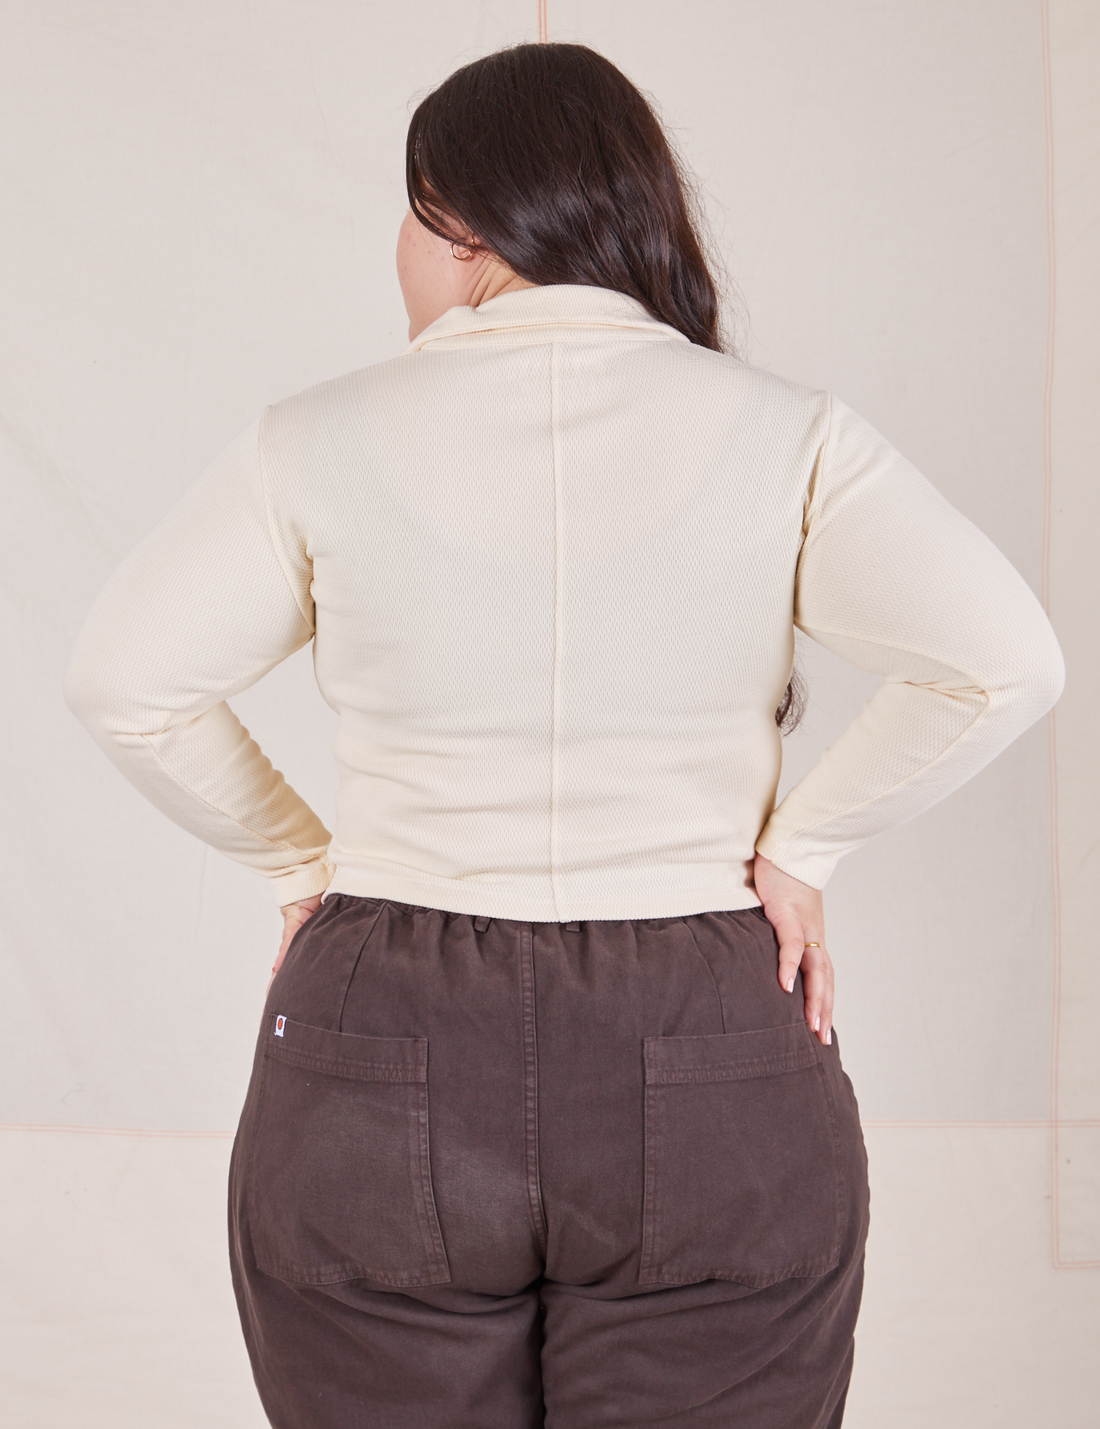 Long Sleeve Fisherman Polo in Vintage Tee Off-White back view on Ashley wearing espresso brown Western Pants